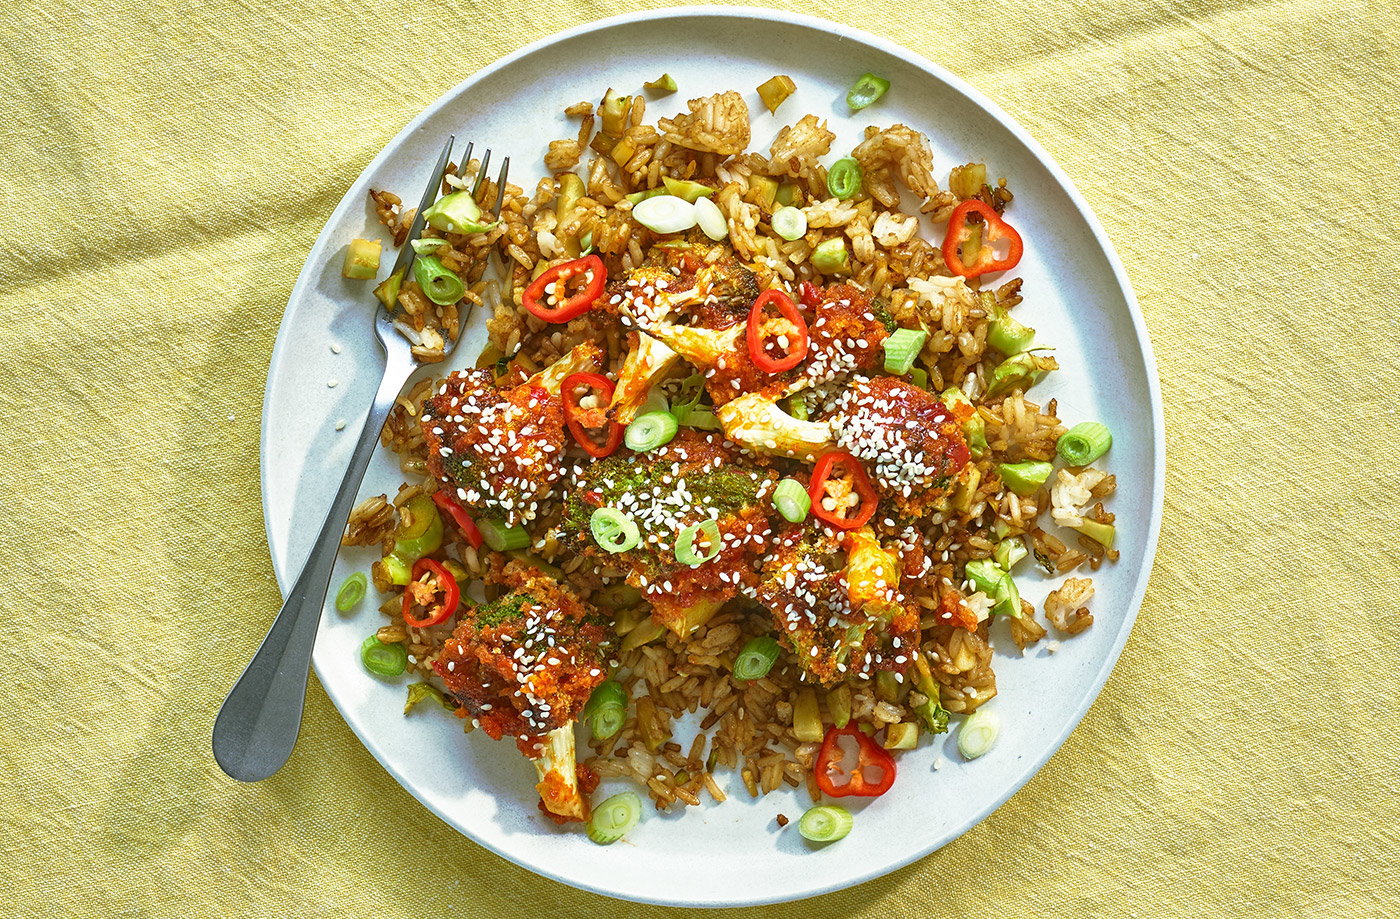 Sticky broccoli fried rice and ovenbake risotto: cheap rice dishes